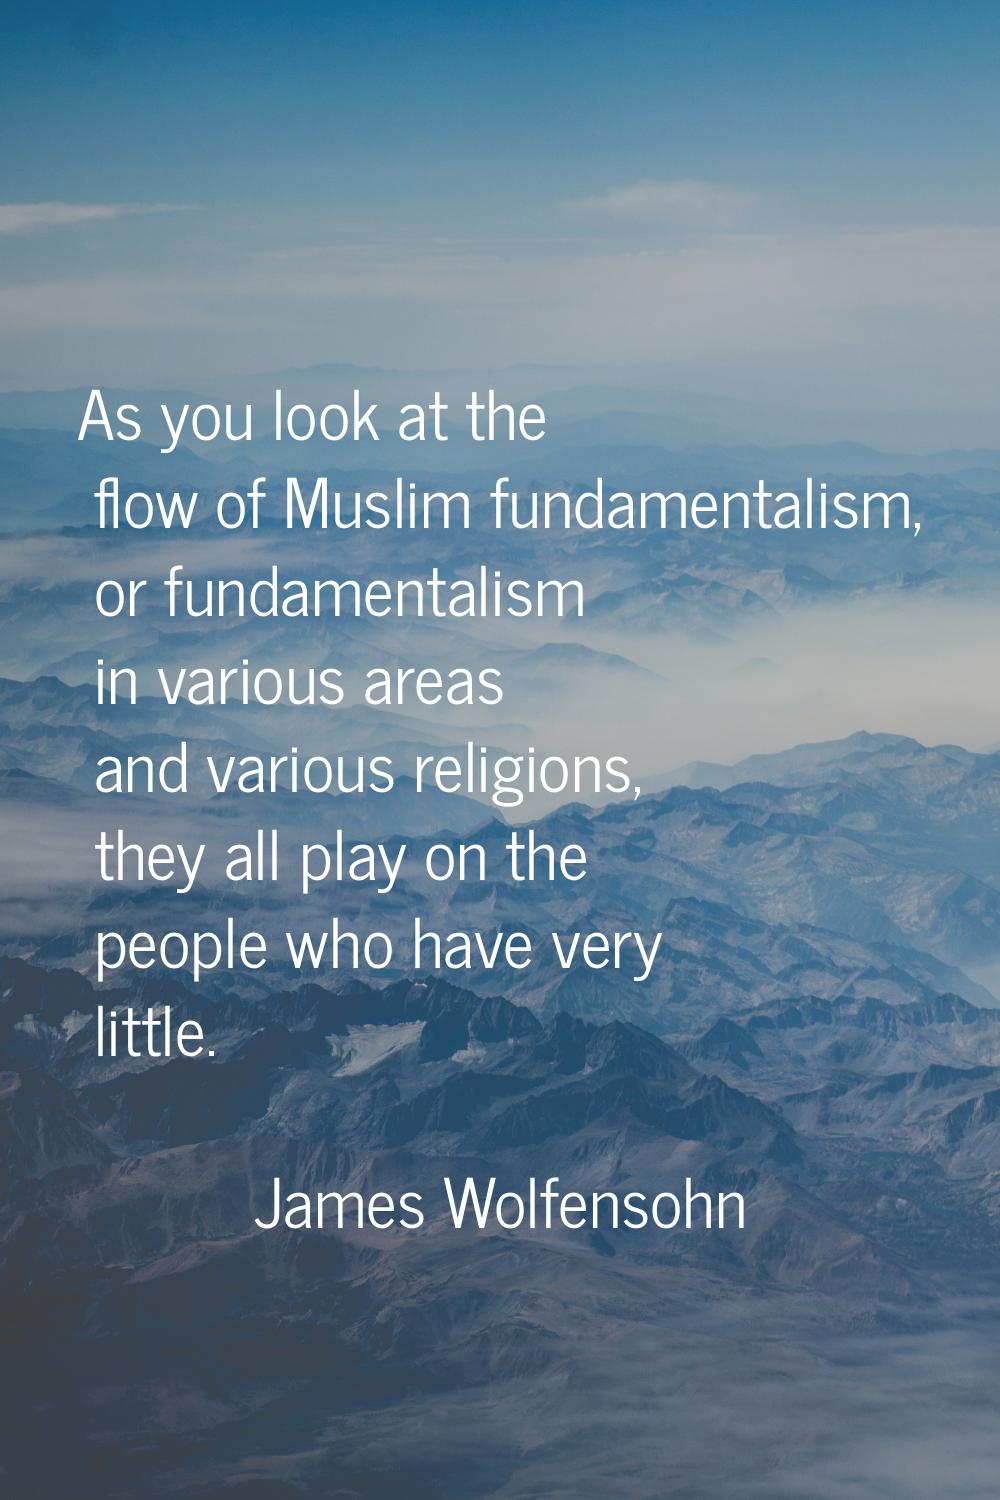 As you look at the flow of Muslim fundamentalism, or fundamentalism in various areas and various re